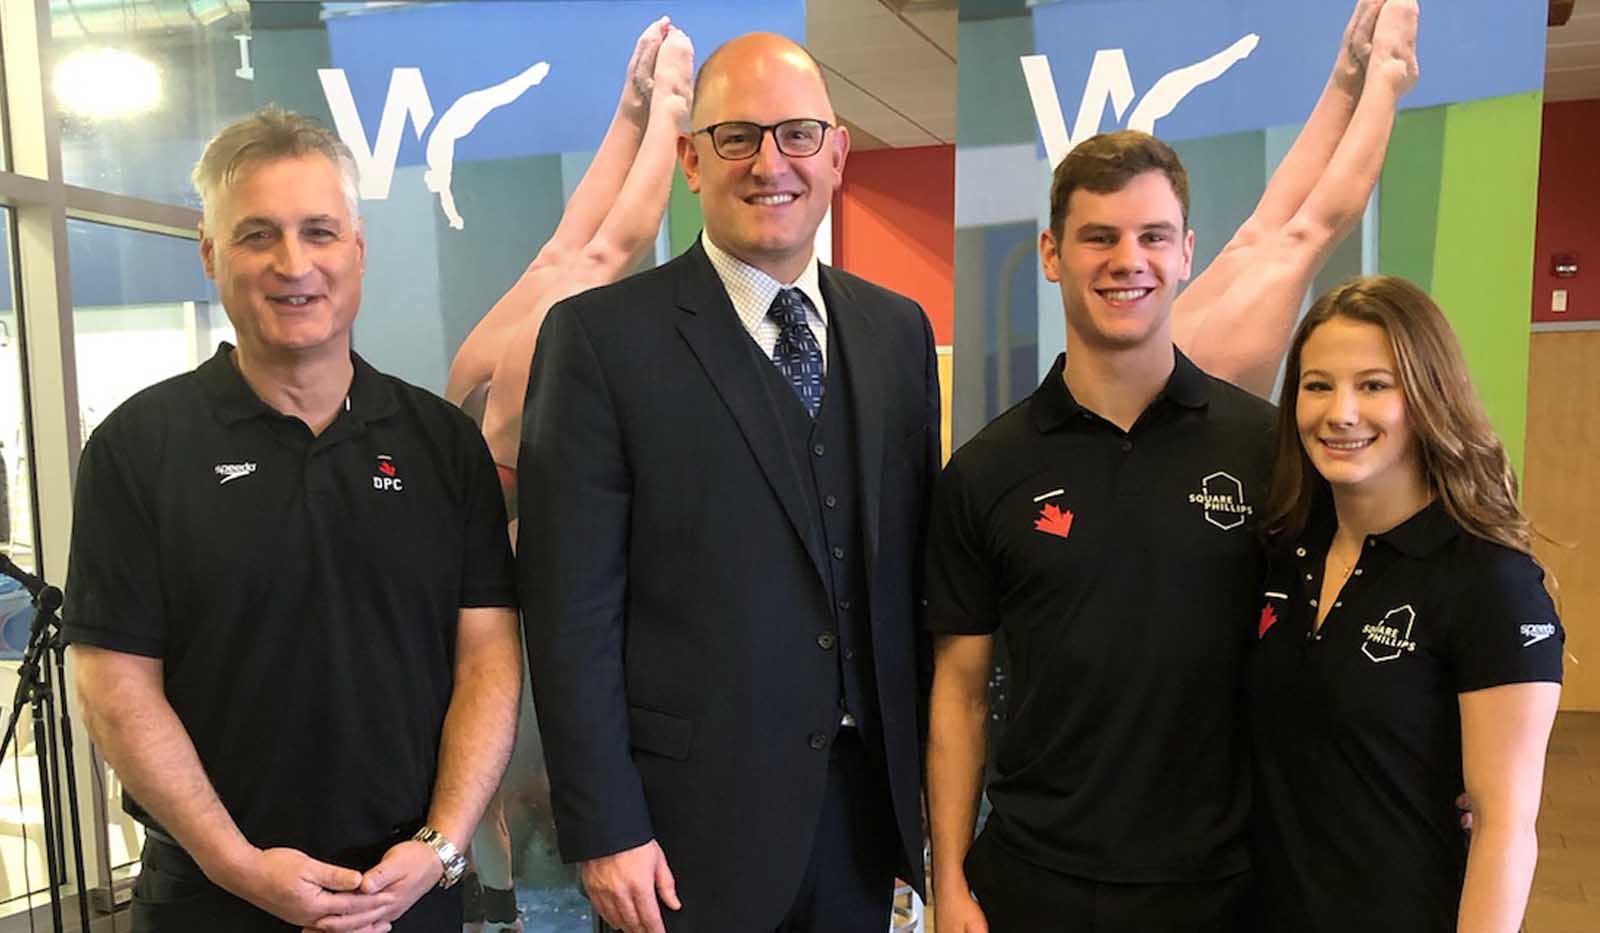 WINDSOR TO HOST 2020 OLYMPIC DIVING TRIALS